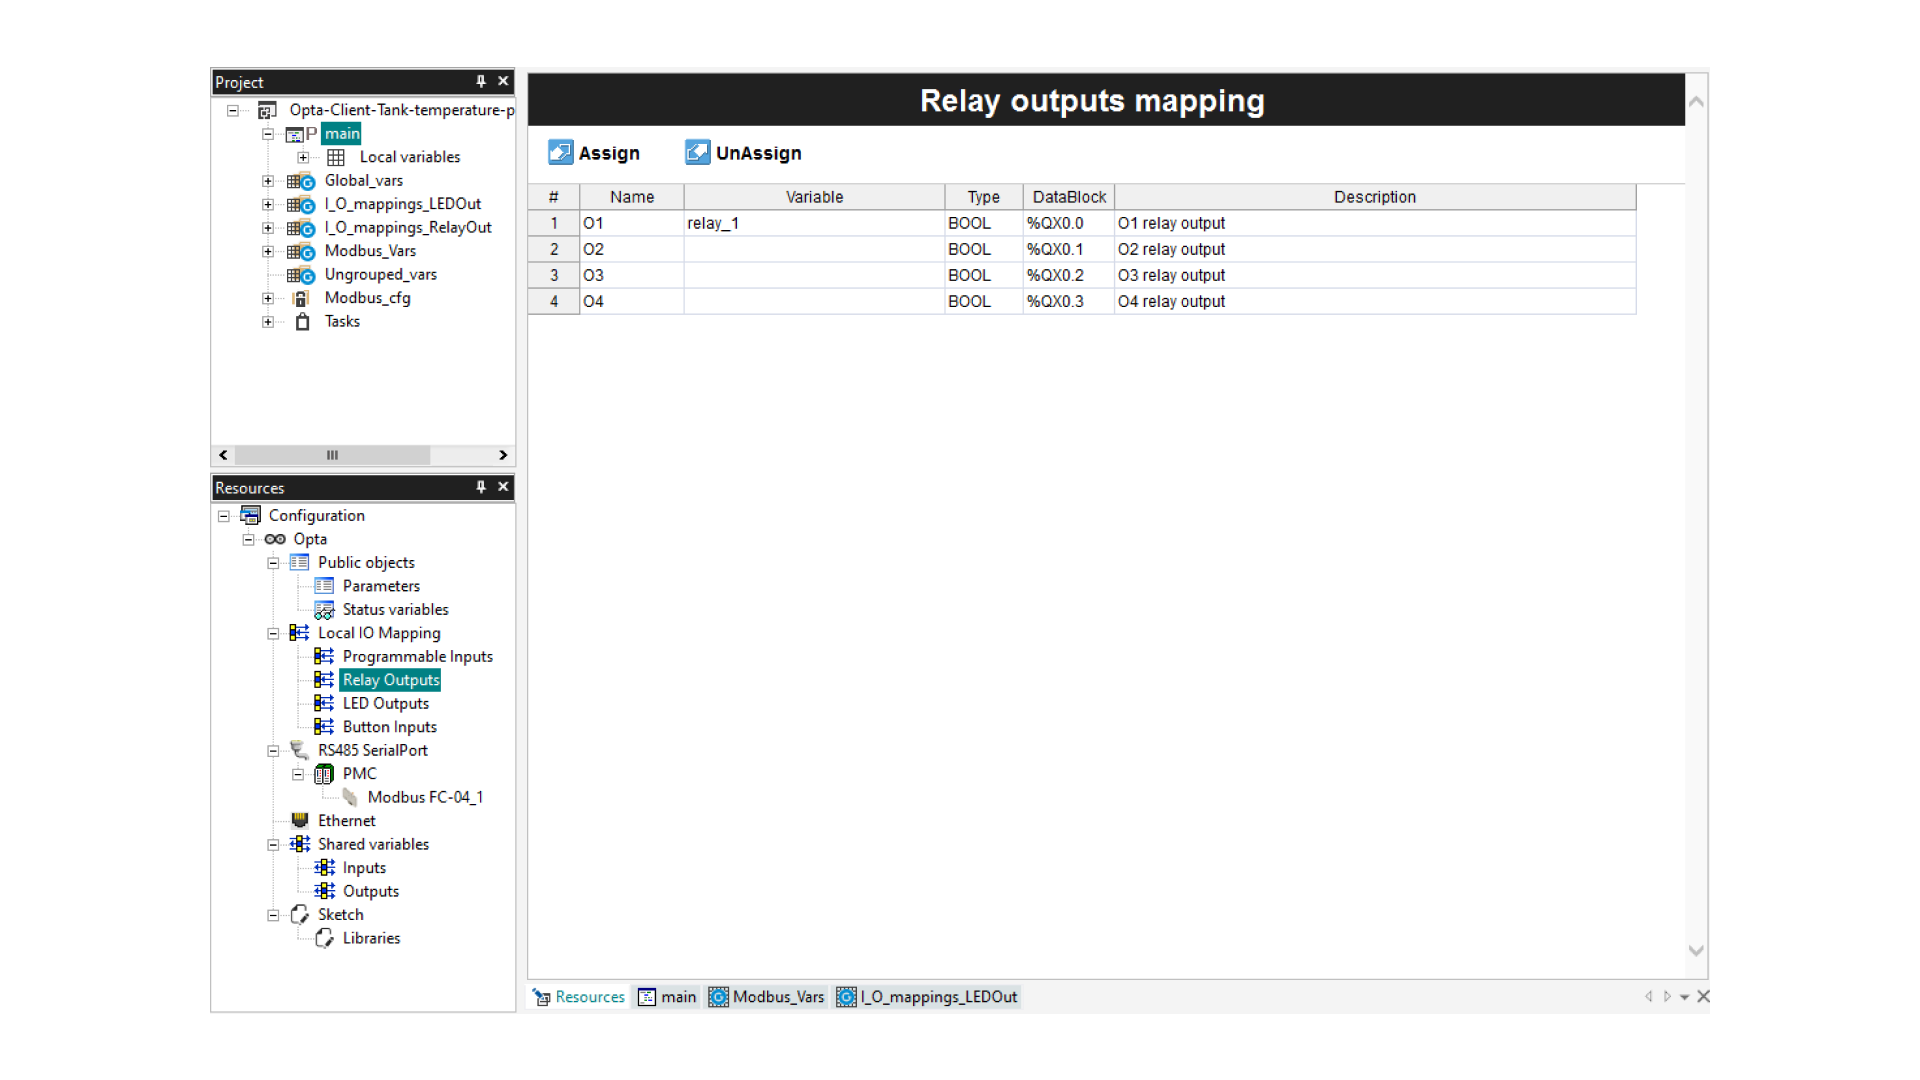 Relay Outputs Mapping